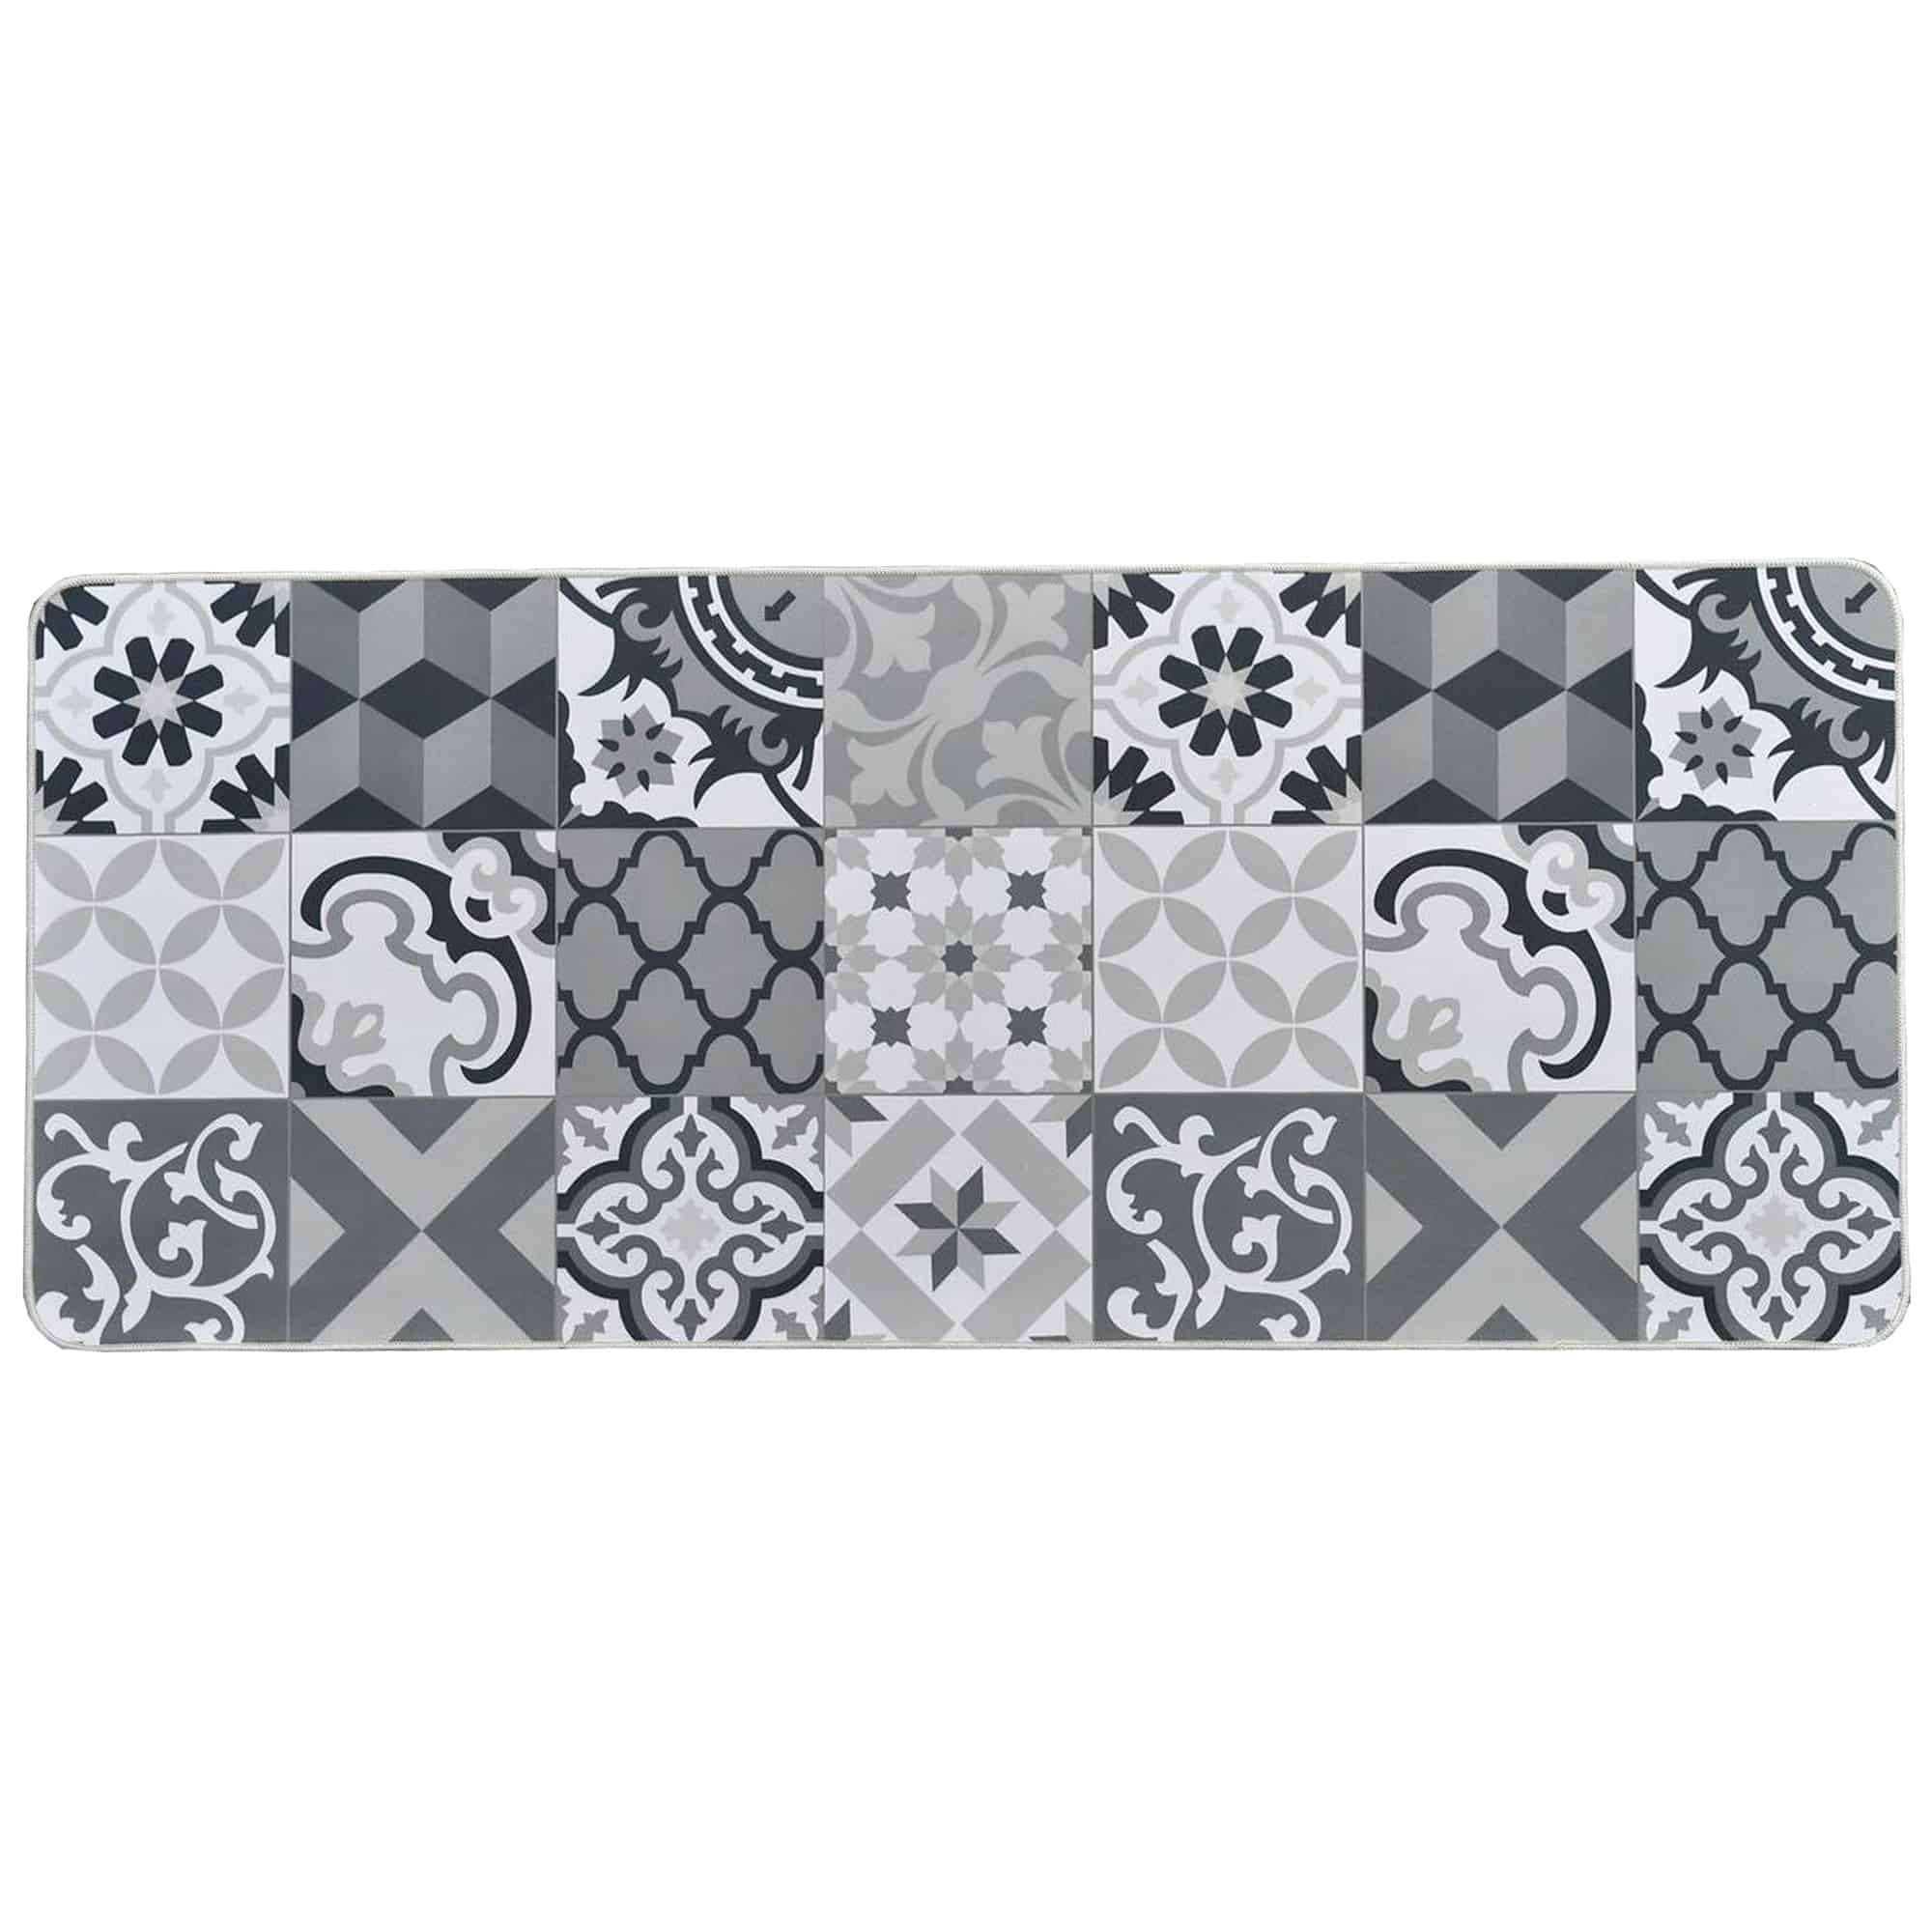 Evideco Chic Cutlery Print Gray Wool-Effect Kitchen Mat and Runner Rug Set of 2